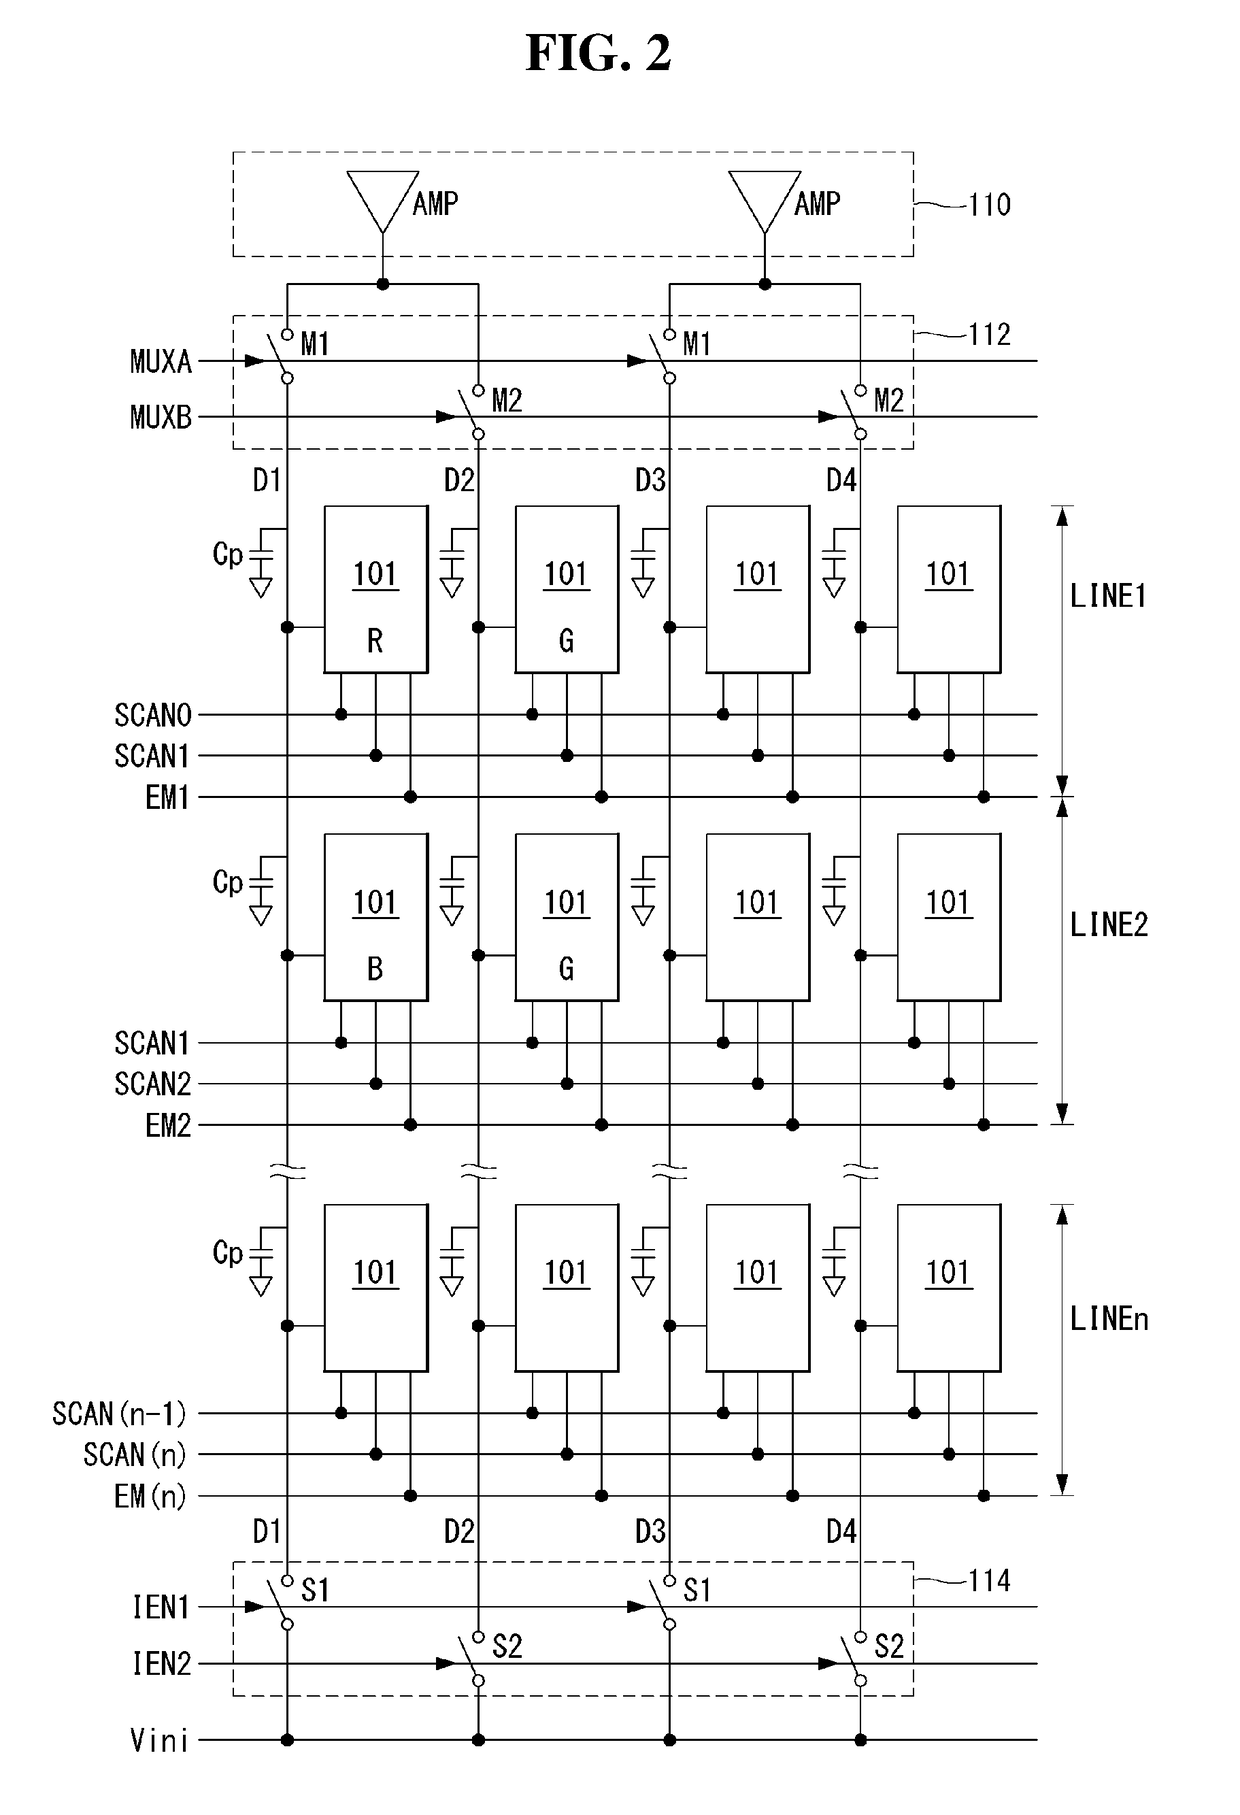 Display panel and electroluminescent display using the same